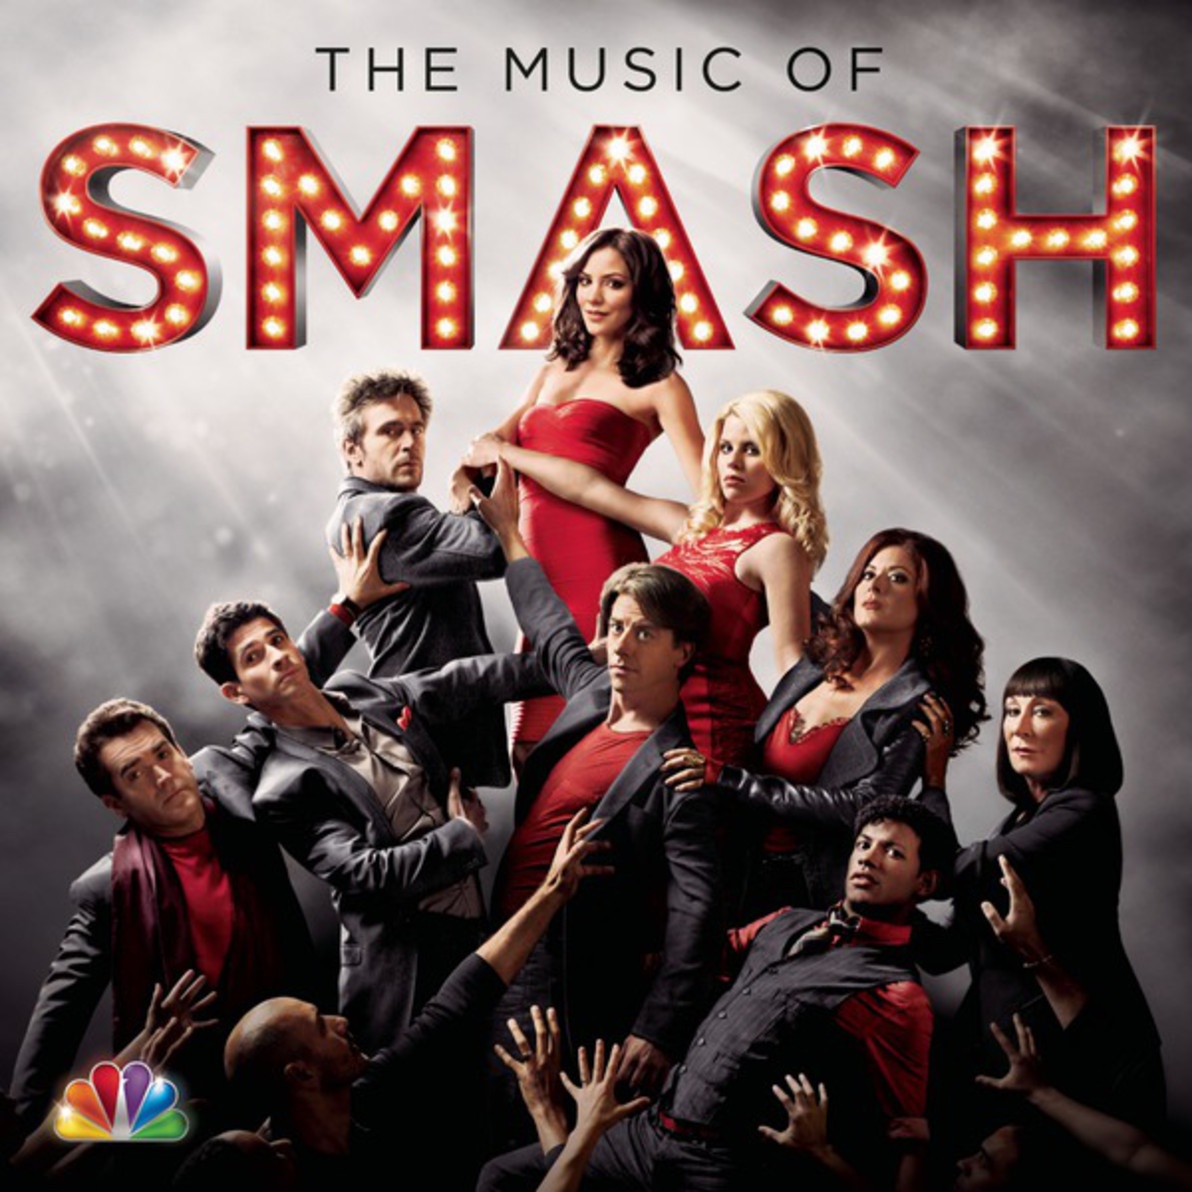 Mr. & Mrs. Smith (SMASH Cast Version featuring Megan Hilty & Will Chase)